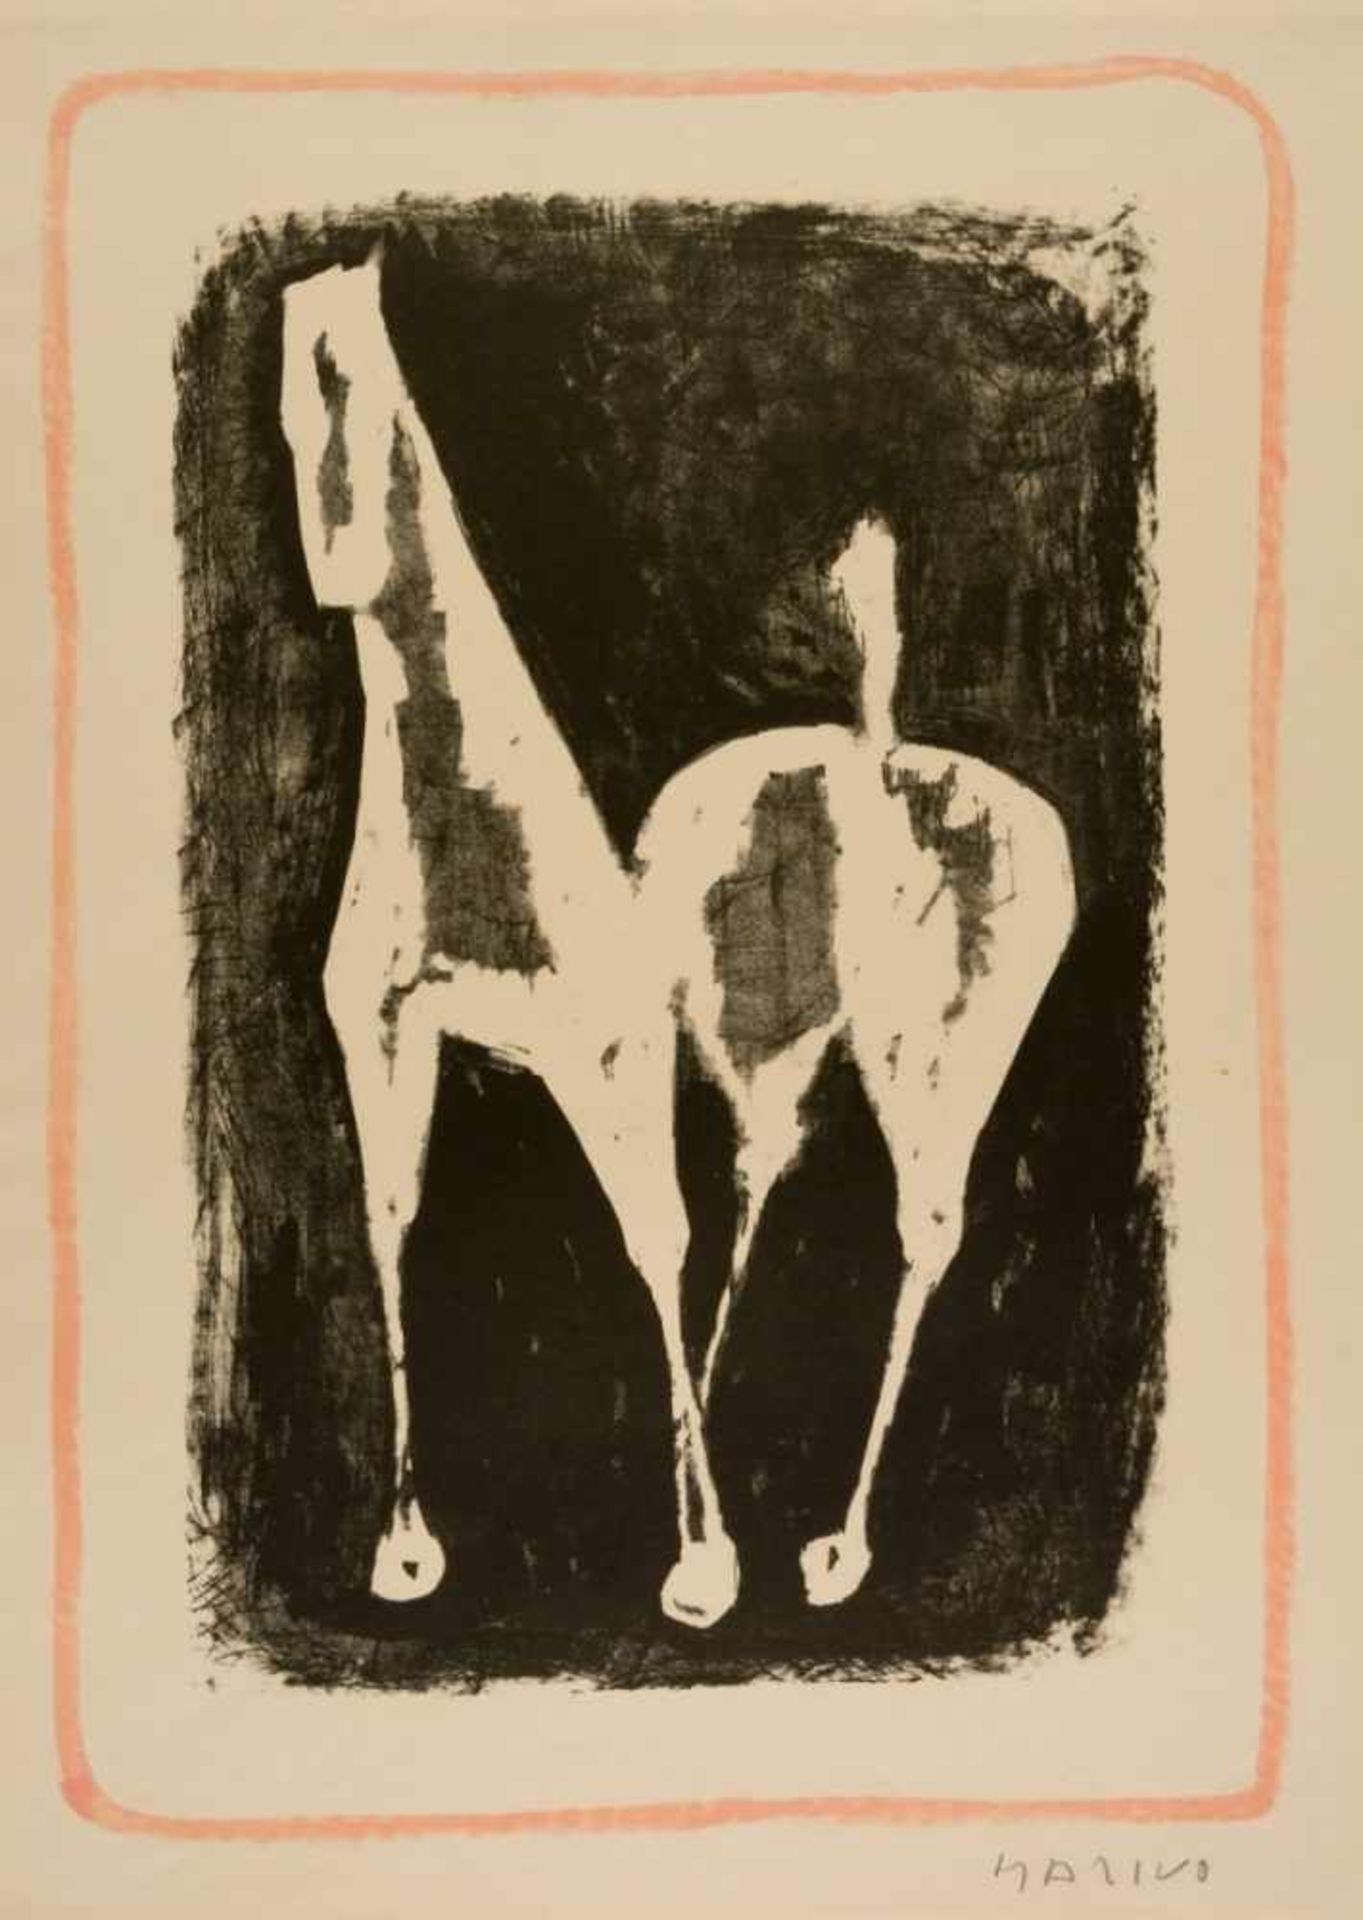 Marino MARINI (1901-1980), Cavallo, Very large lithography, signed with pencil, 59 x 41,5cm,